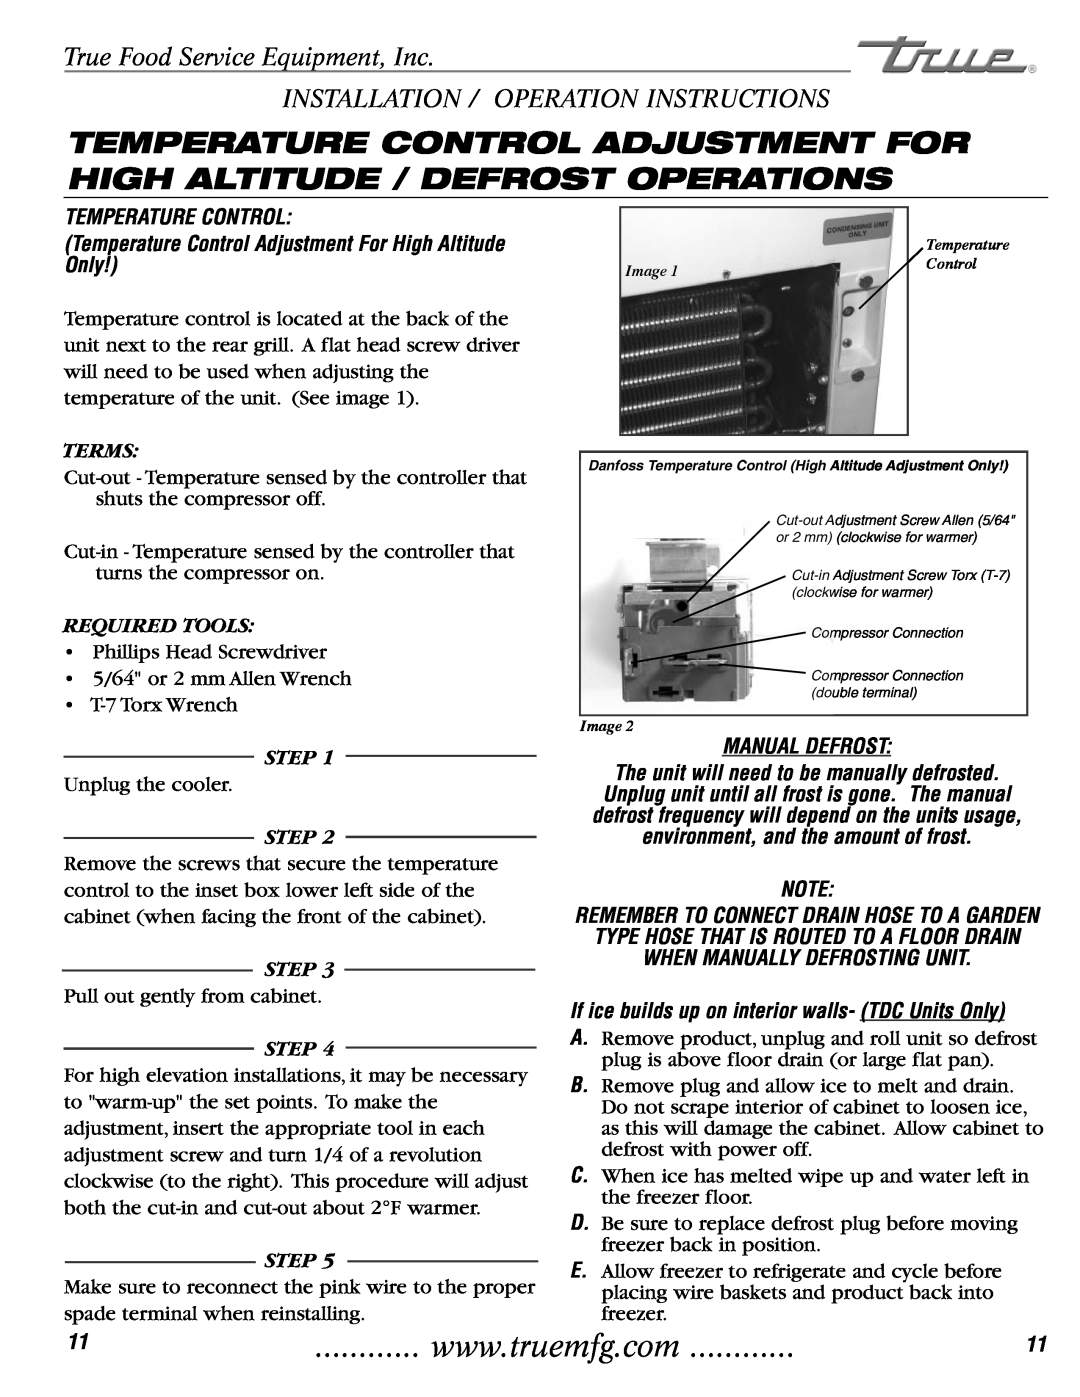 True Manufacturing Company THDC-6 Temperature Control Adjustment For High Altitude / Defrost Operations, Only, Terms, Step 